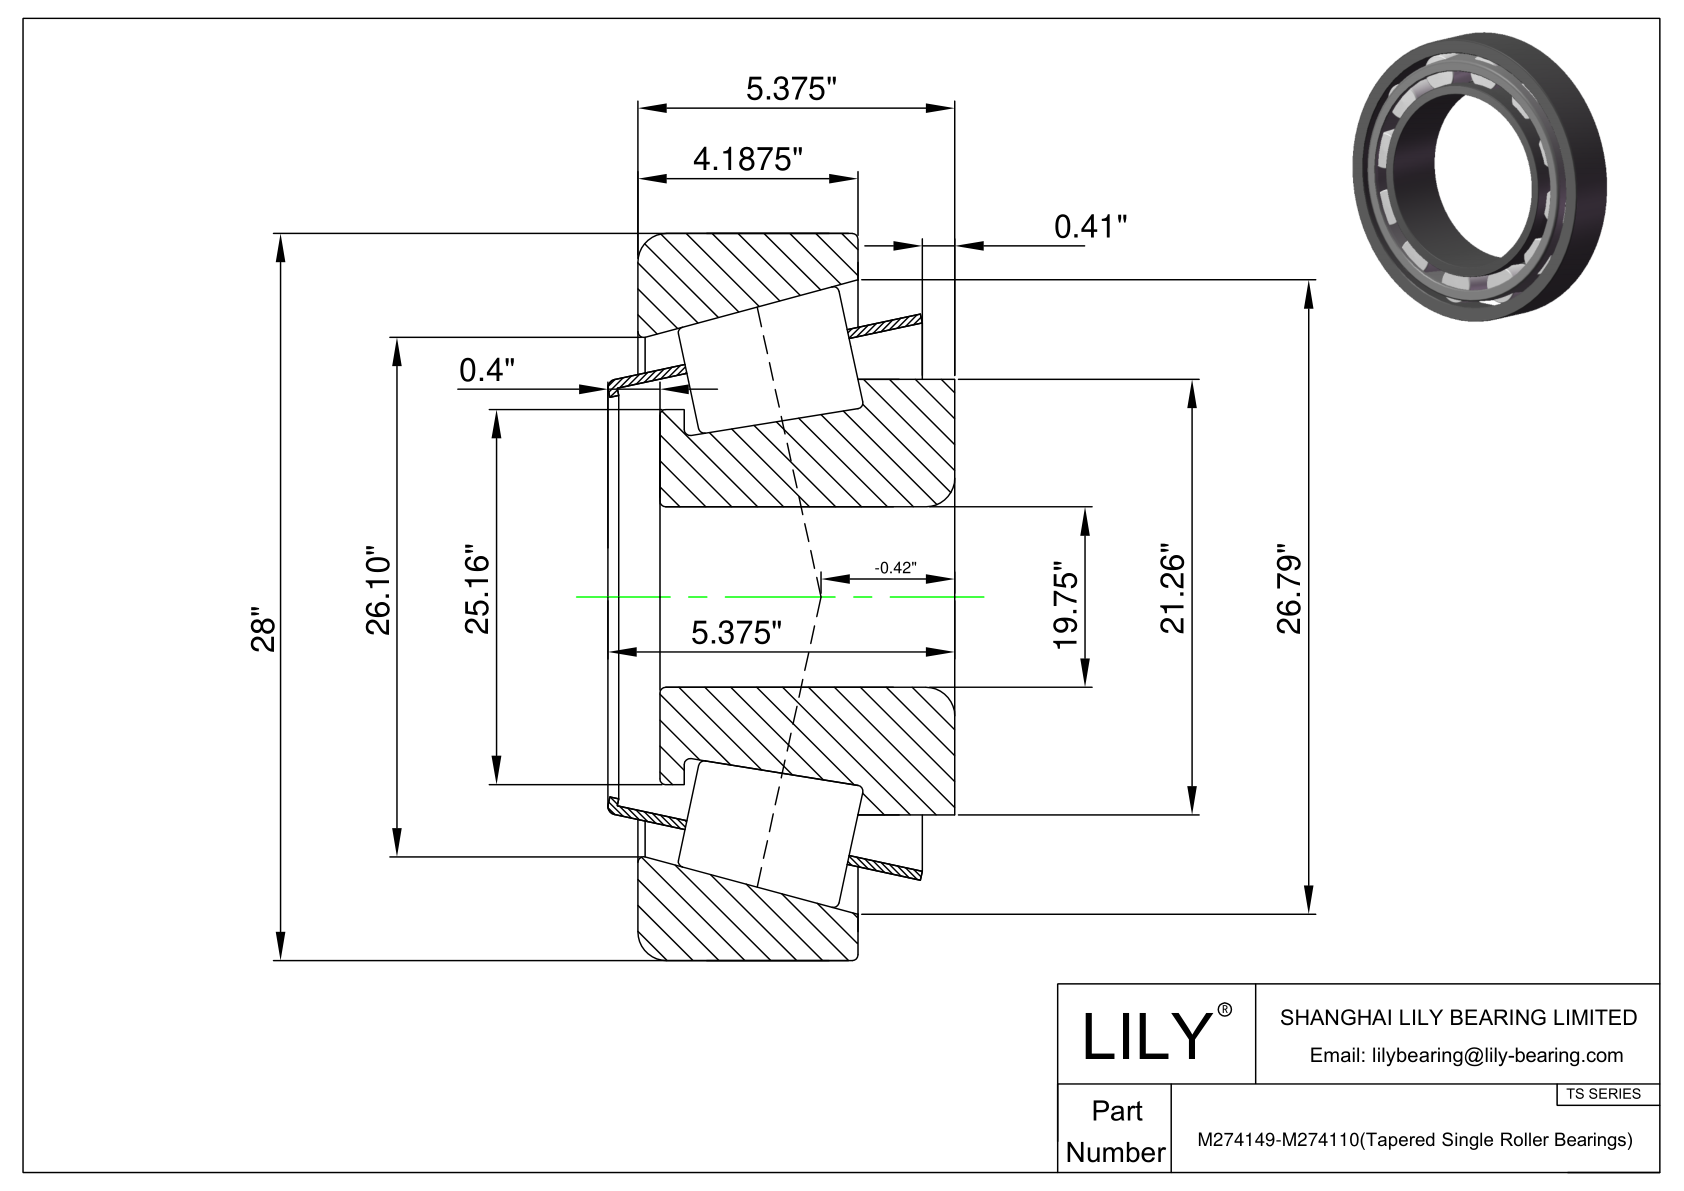 M274149-M274110 TS (Tapered Single Roller Bearings) (Imperial) cad drawing